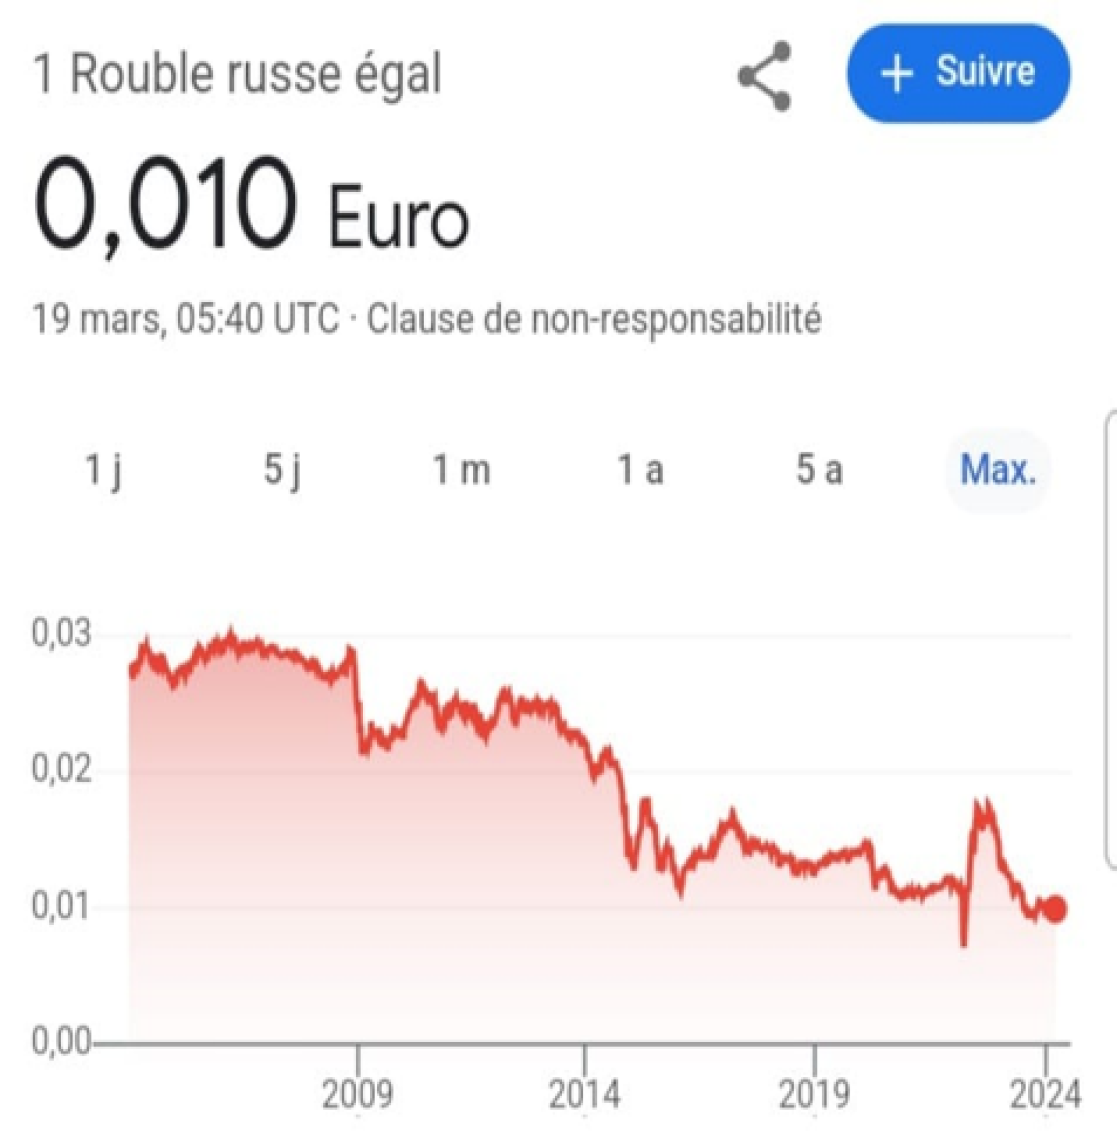 Rouble to Euro conversion rate